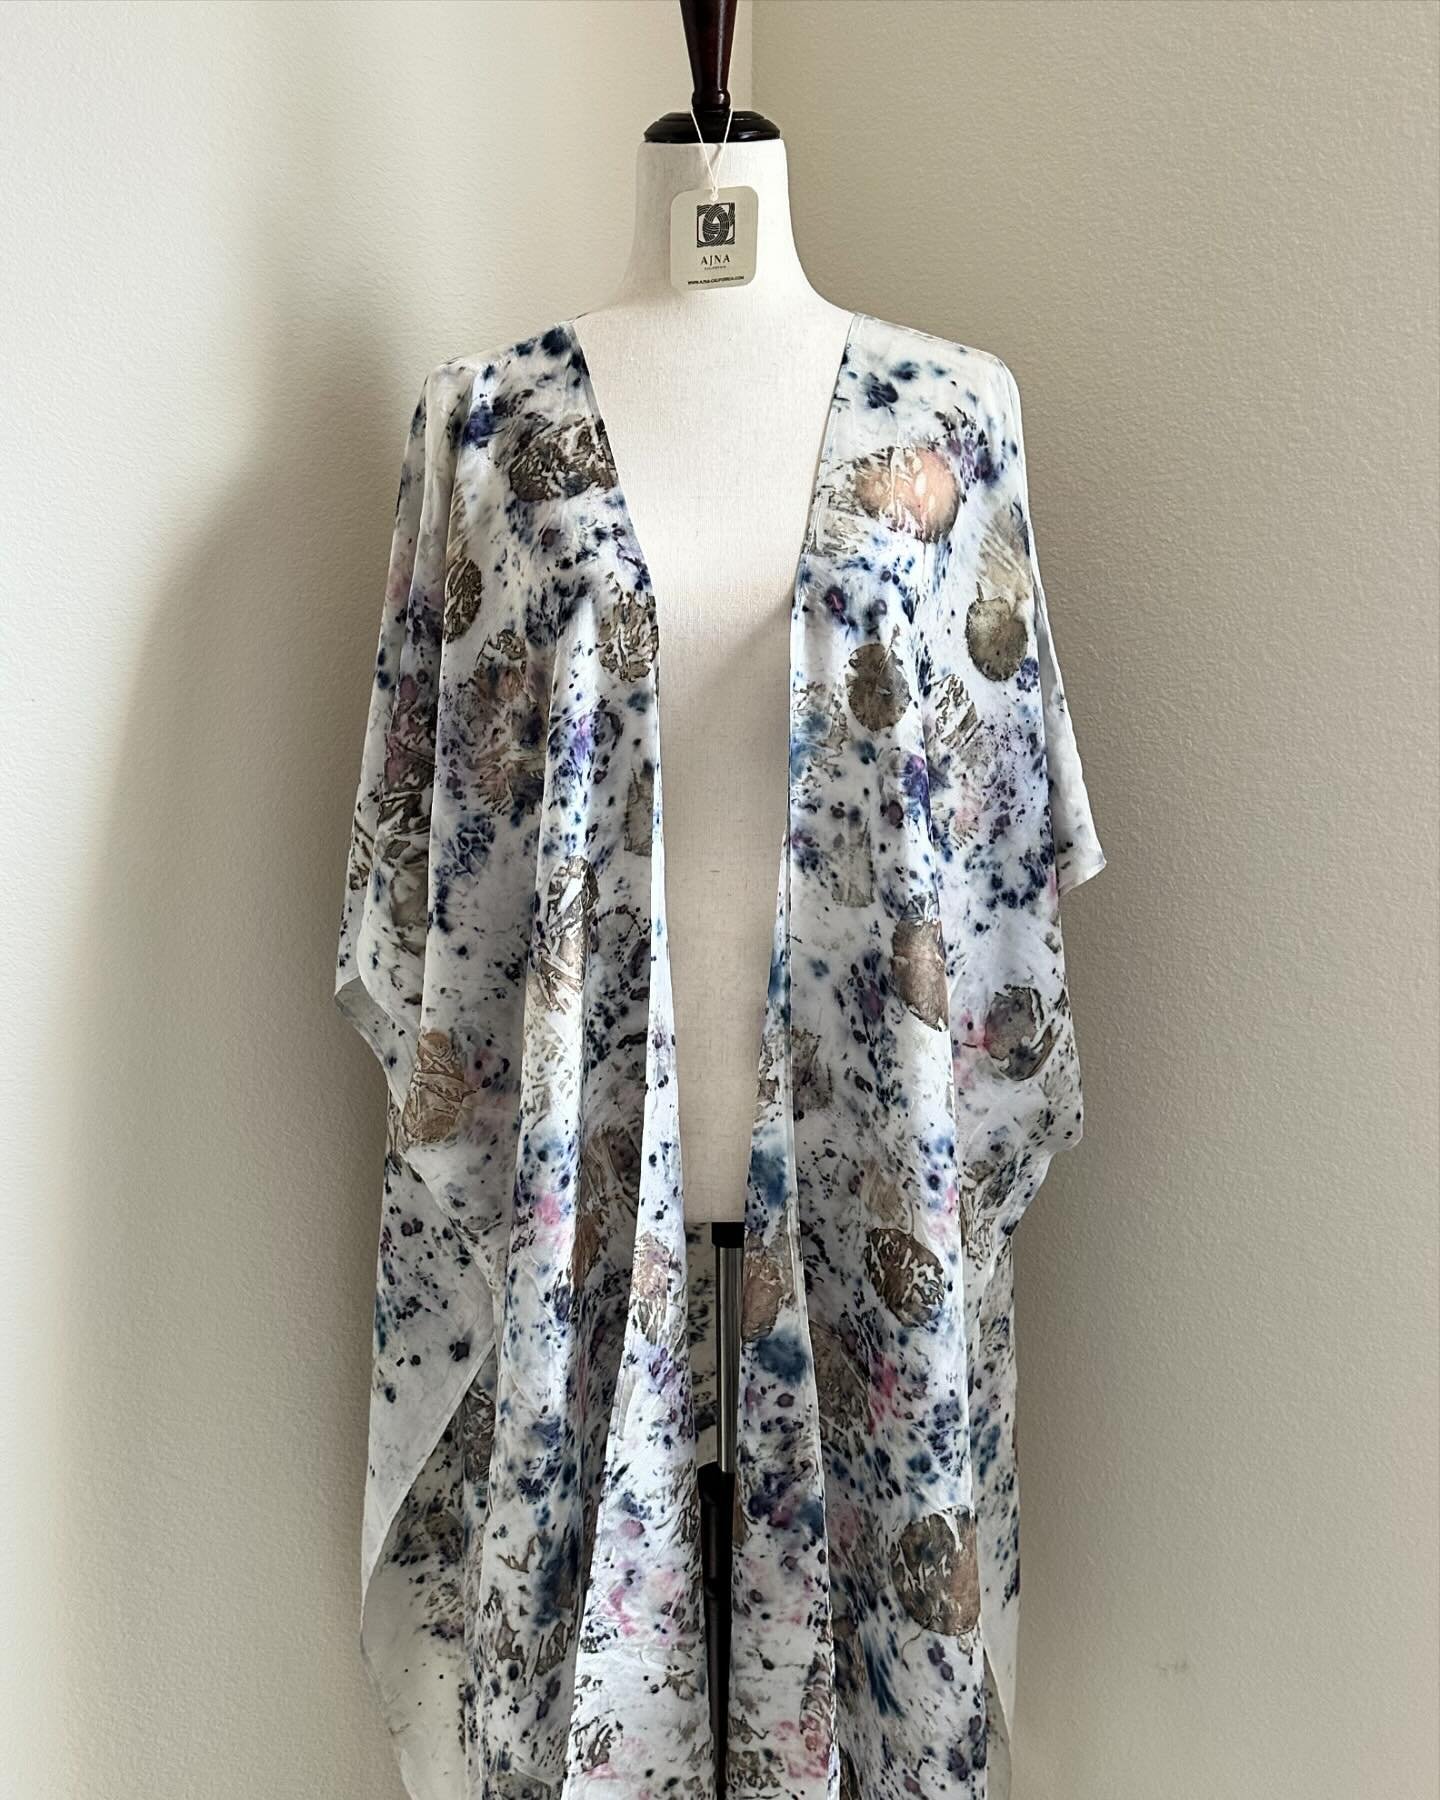 💜 Kismet 💜 Eco-printed silk duster top ✨
One of a kind and one size fits all

#ecoprinted #dustertop #ajnacalifornia #naturaldyeing #oneofakind